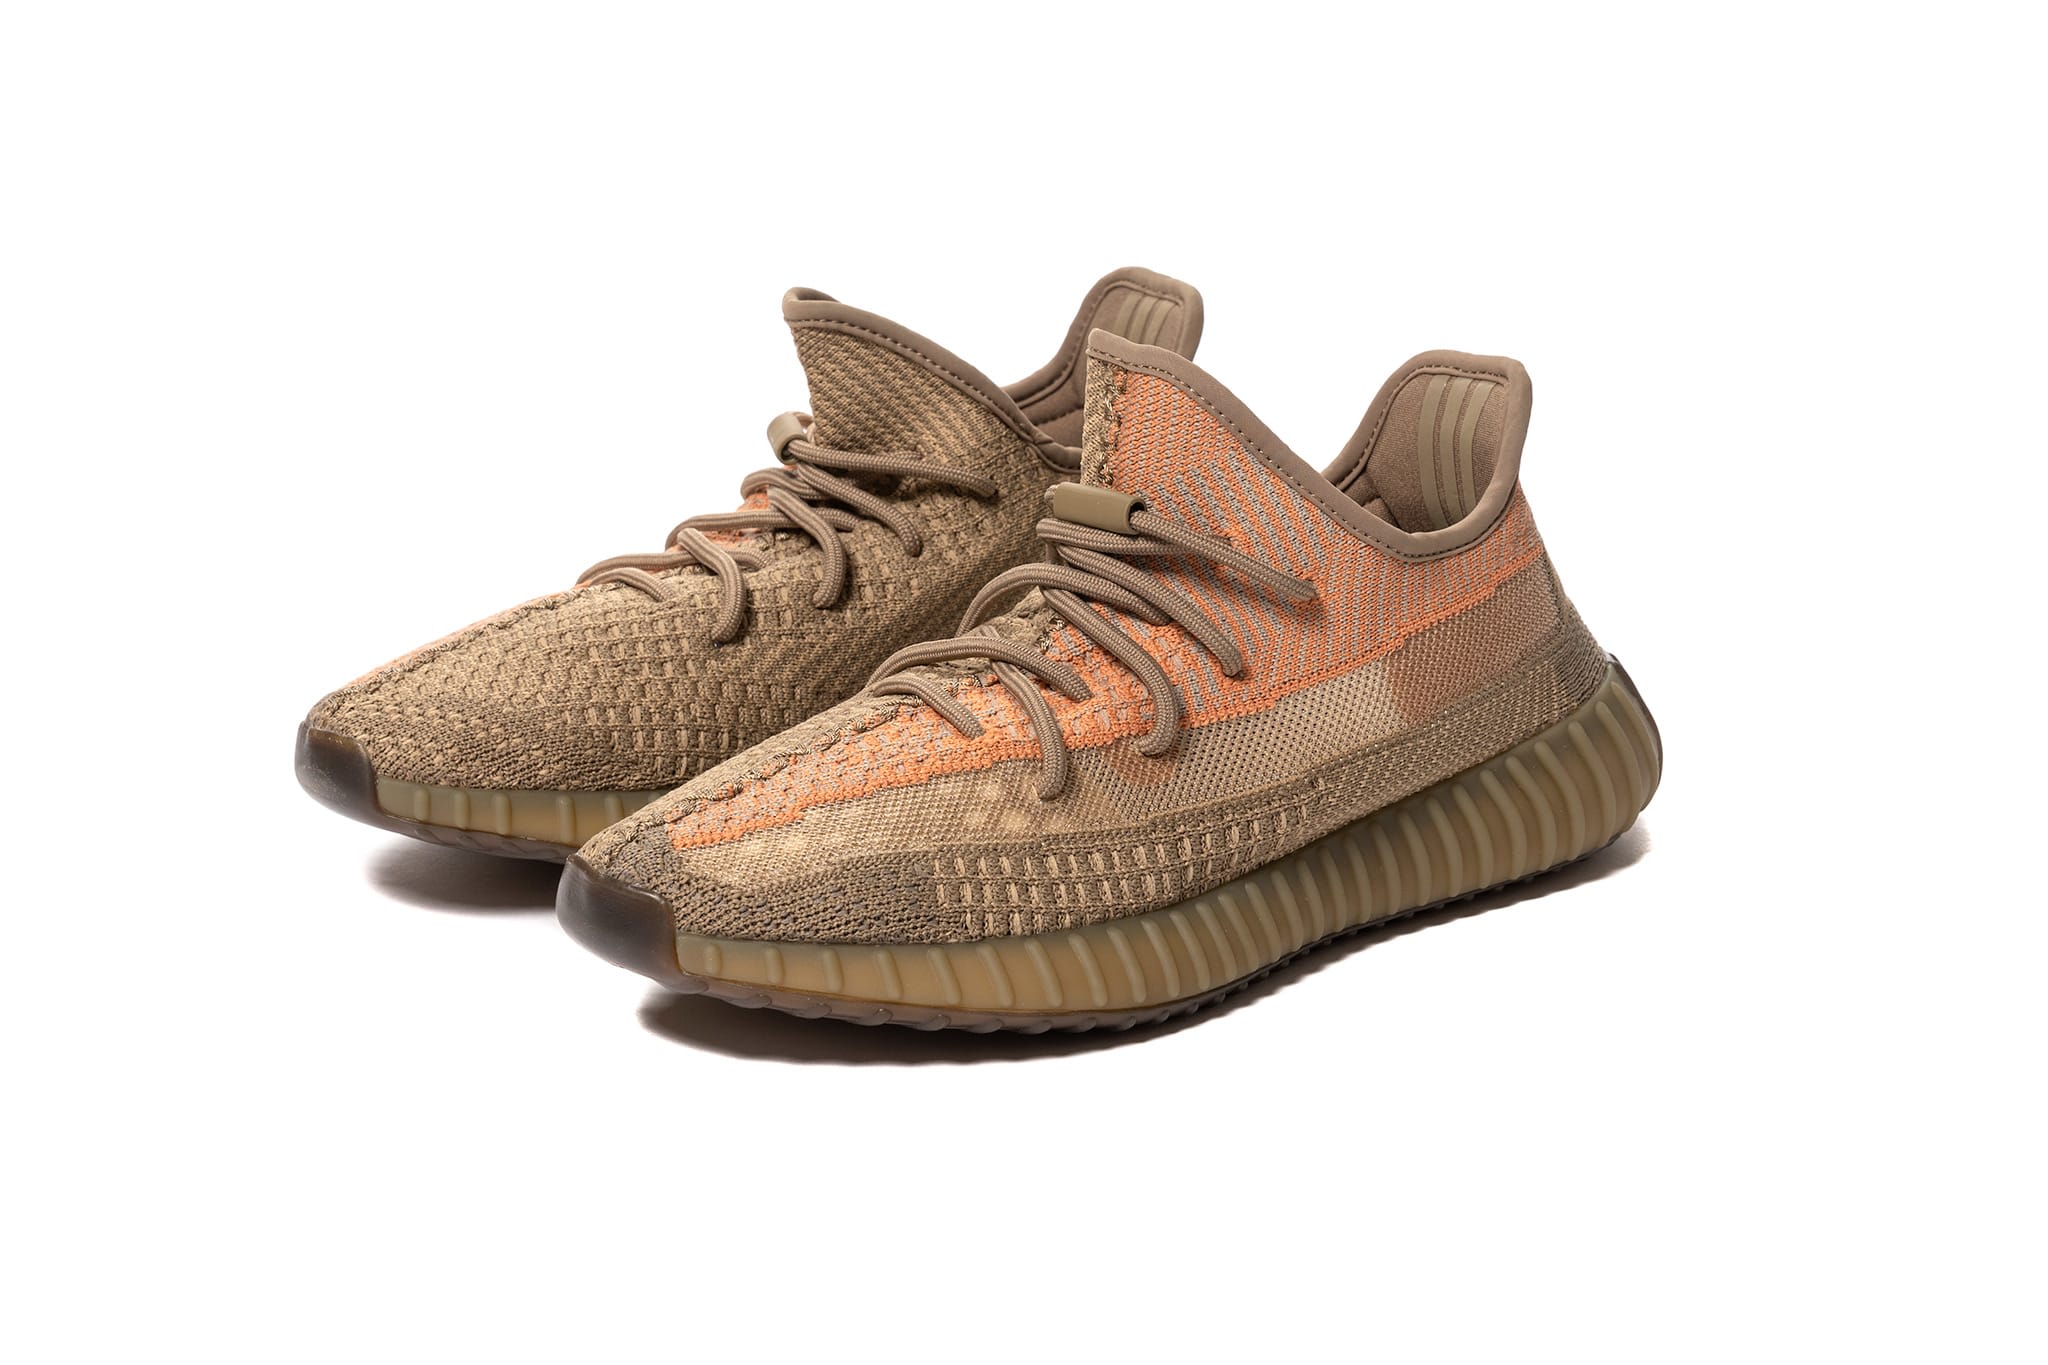 Adidas Yeezy 350 V2 Sand Taupe Release Date 12 19 20 Haven